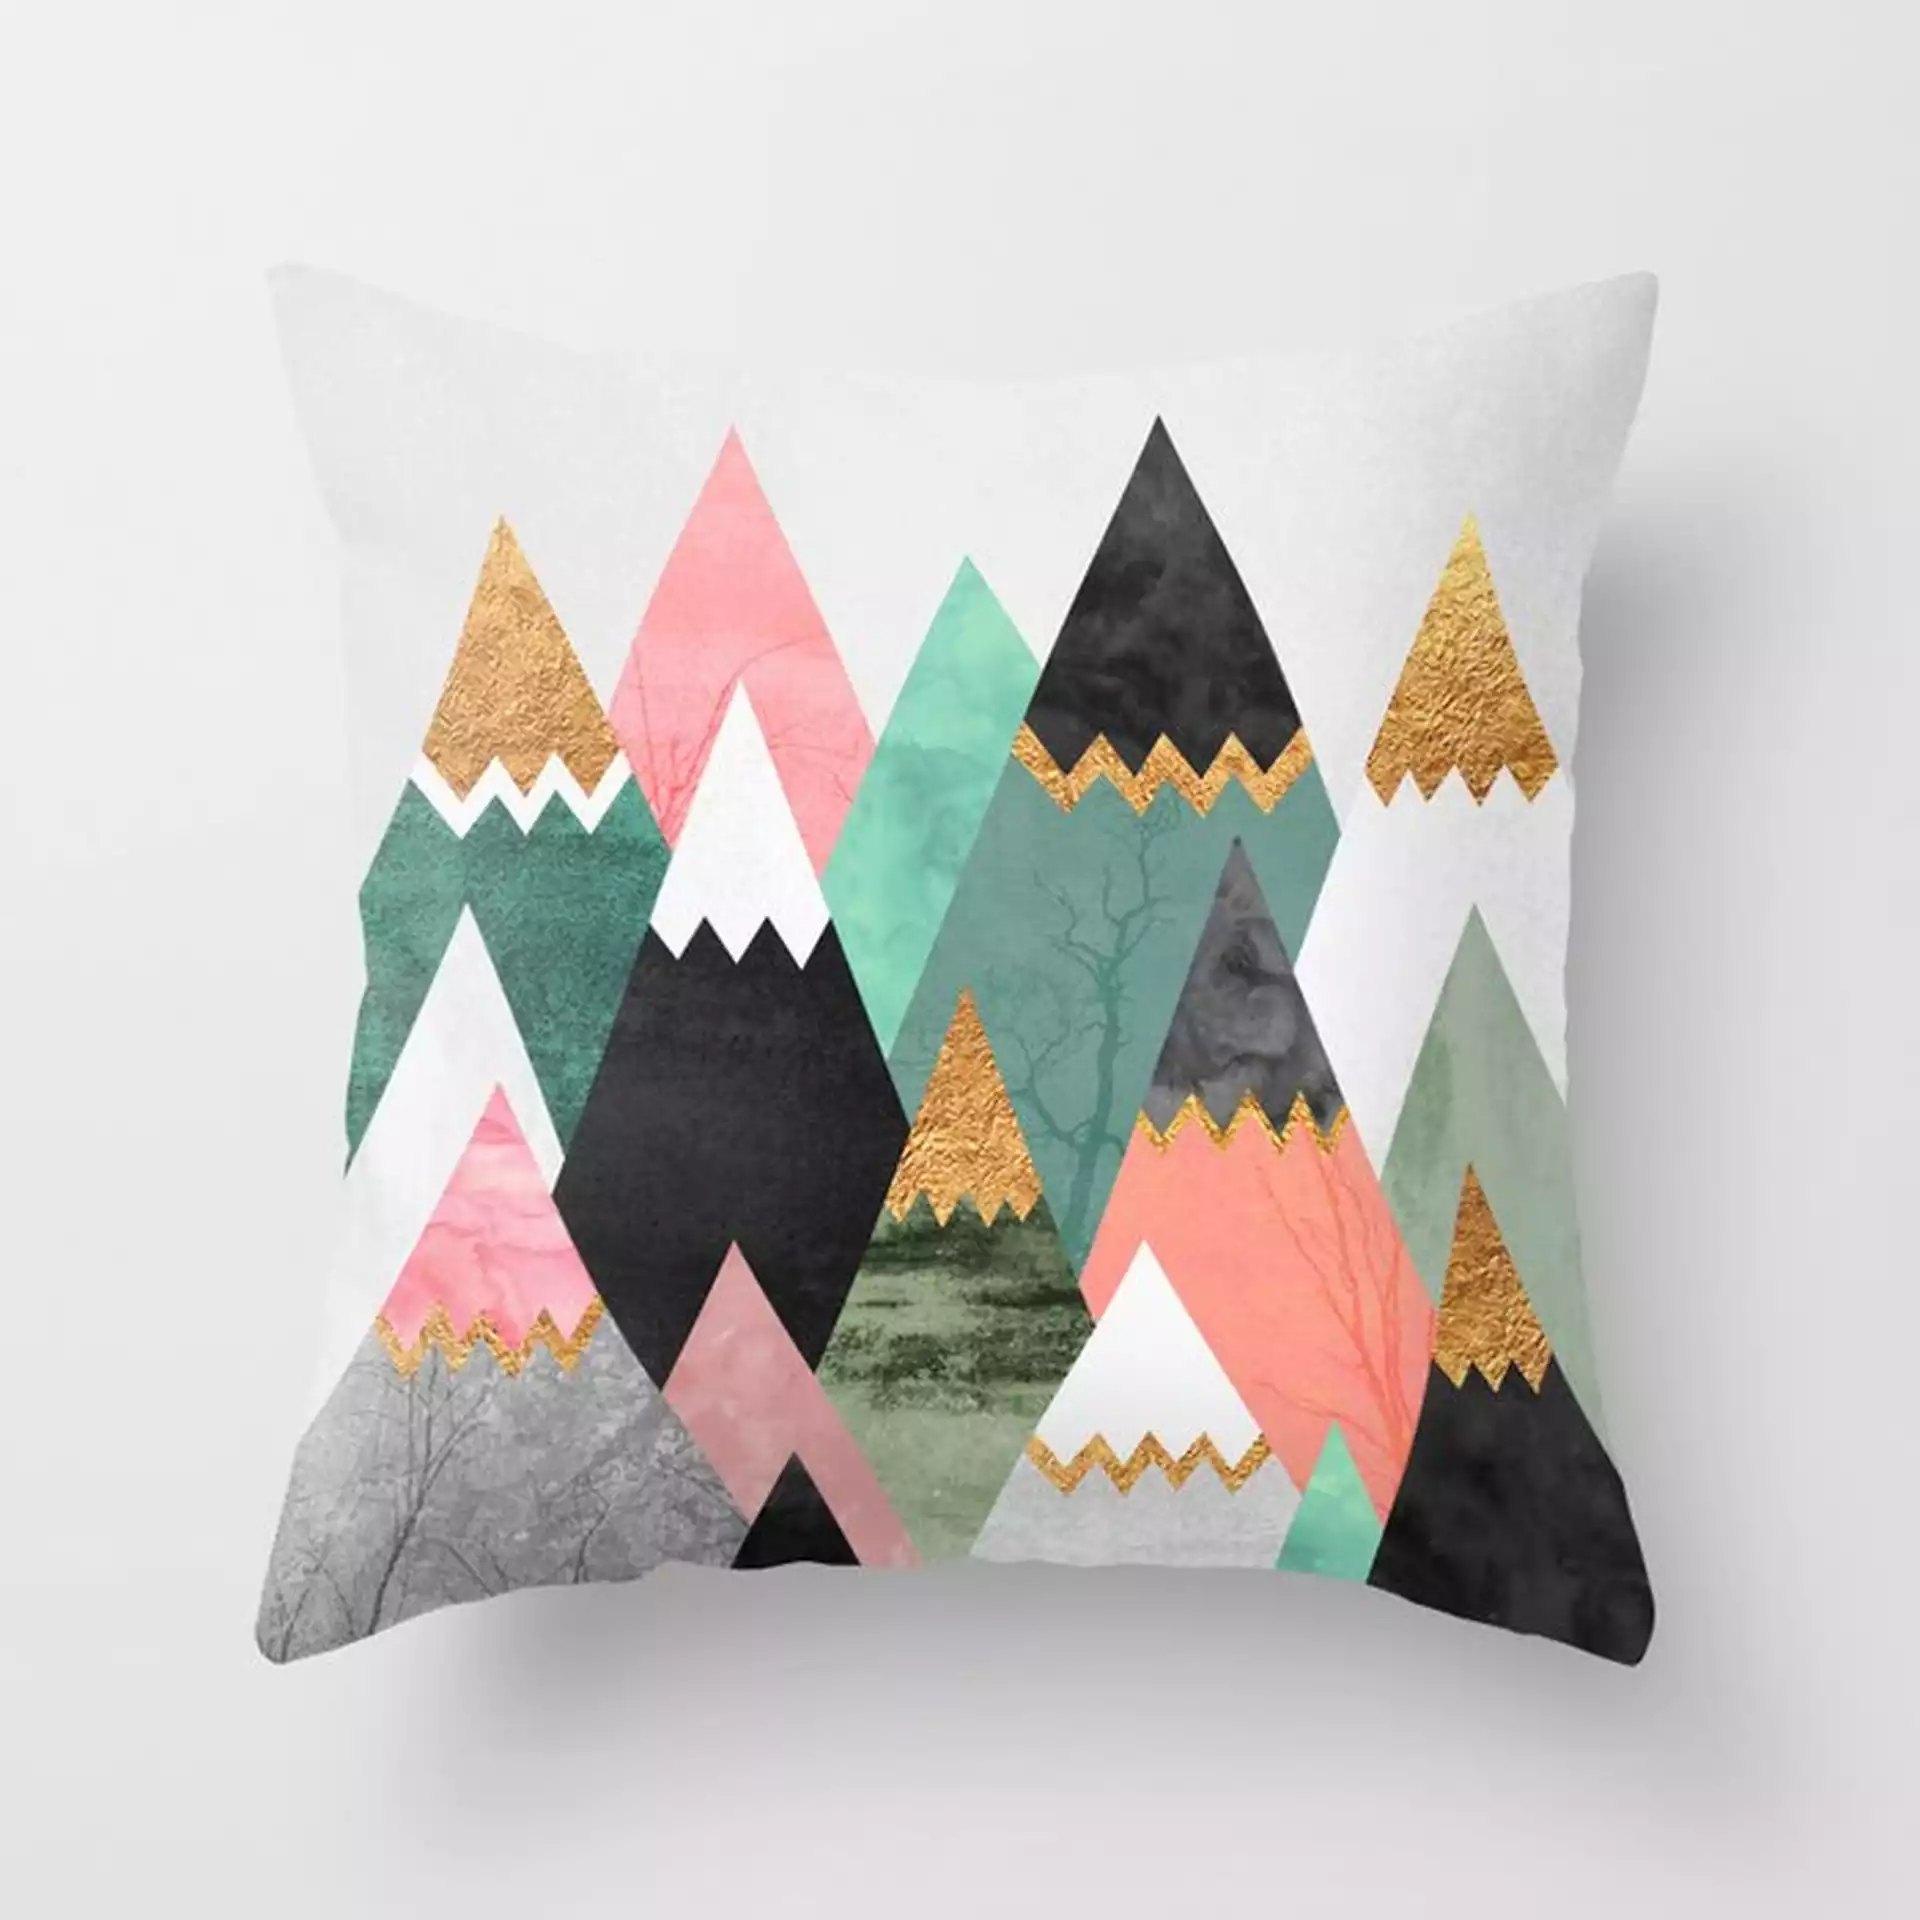 Pretty Mountains Couch Throw Pillow by Elisabeth Fredriksson - Cover (18" x 18") with pillow insert - Outdoor Pillow